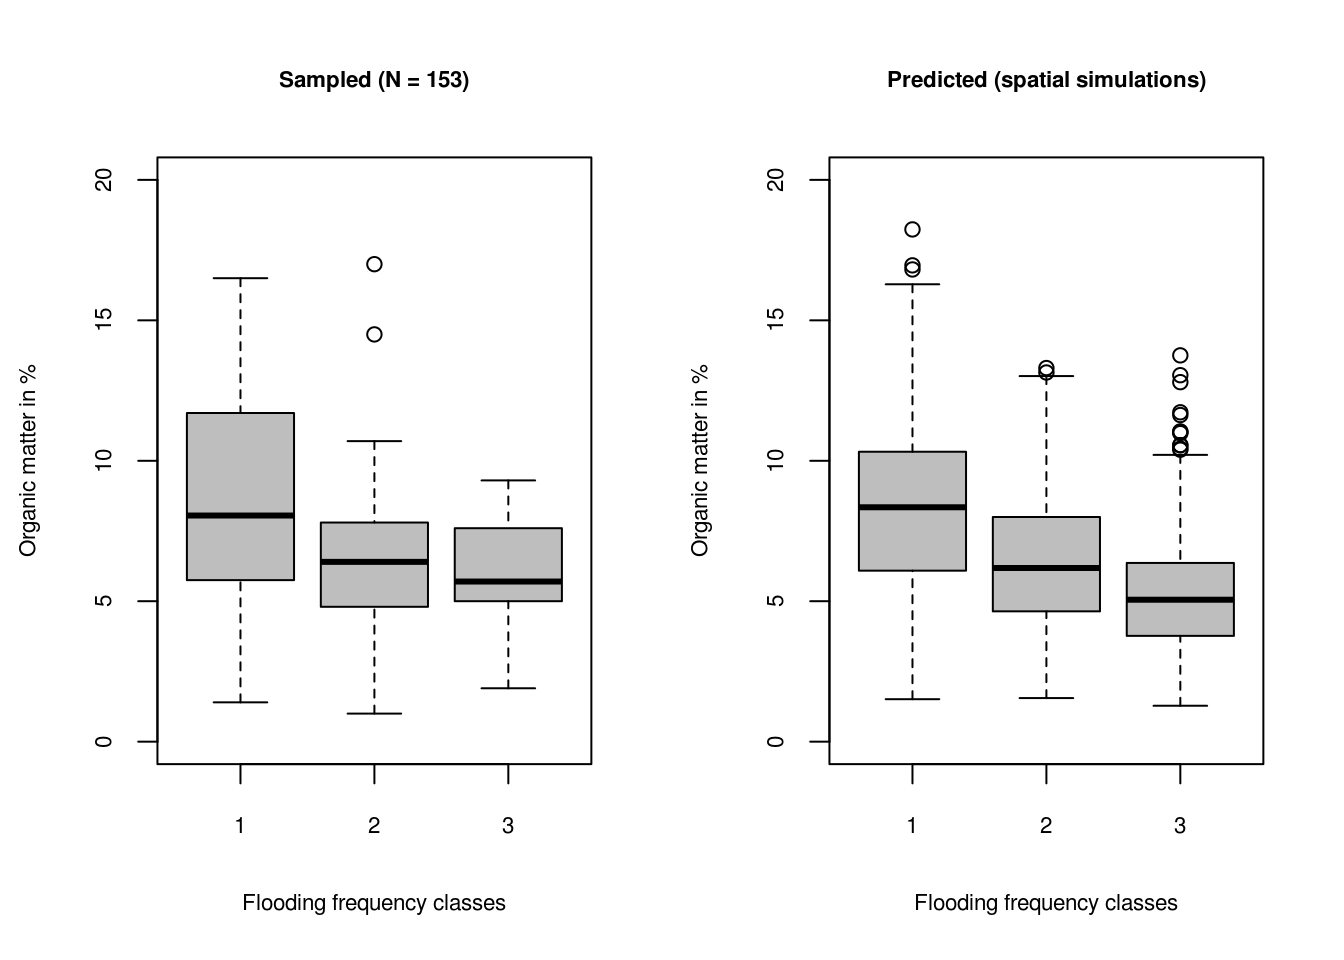 Prediction intervals for three flooding frequency classes for sampled and predicted soil organic matter. The grey boxes show 1st and 3rd quantiles i.e. range where of data falls.